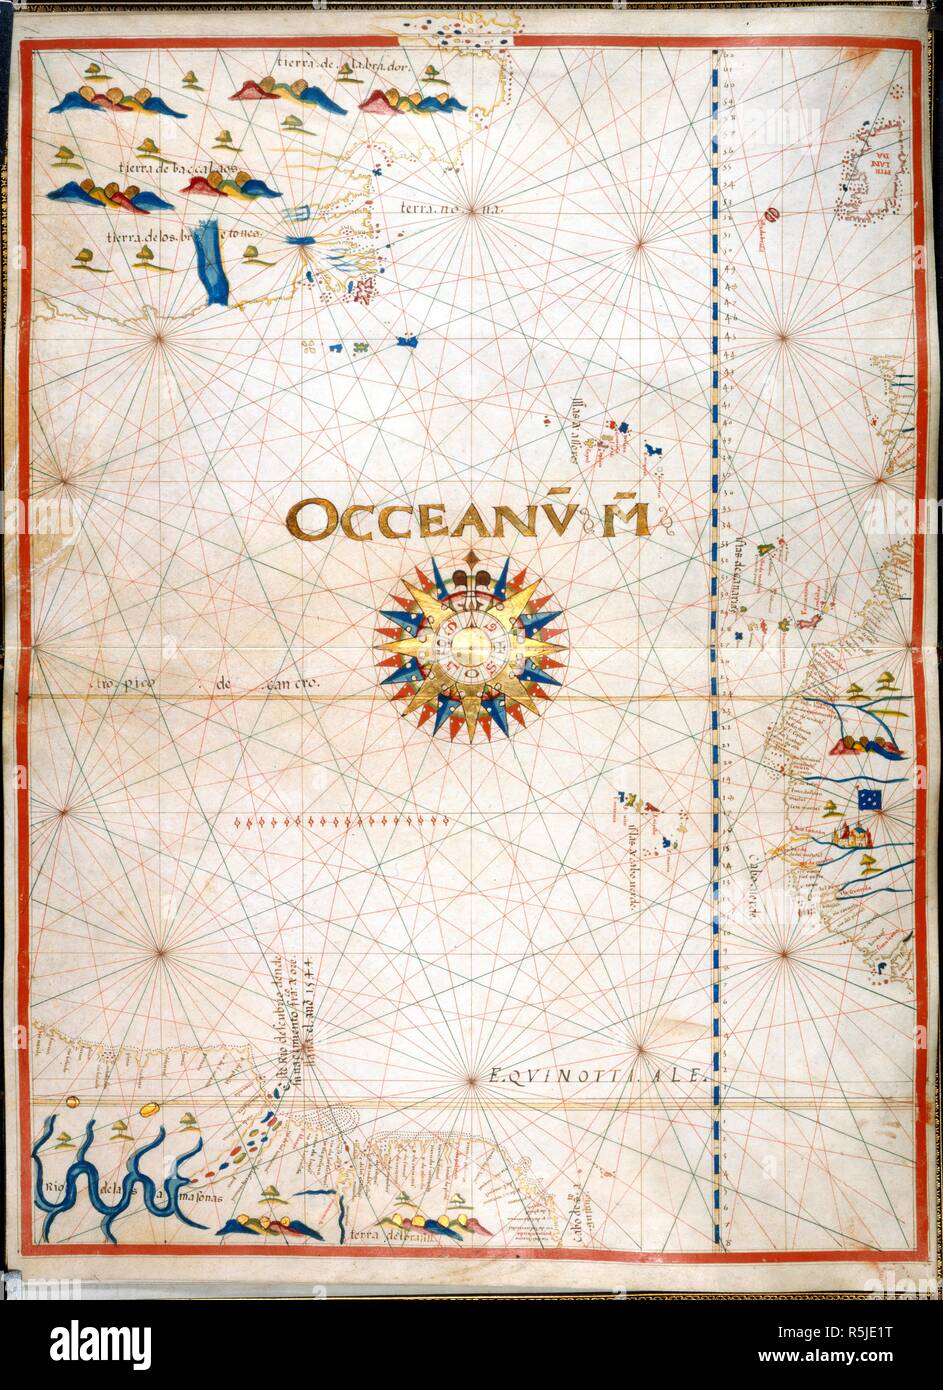 Chart of the Atlantic Ocean. Portolano. Spain; before 1600. [Whole chart]  Chart of the Atlantic Ocean, with Ireland, Portugal, and part of the west  coast of Africa, including the Azores, Madeira, Canary